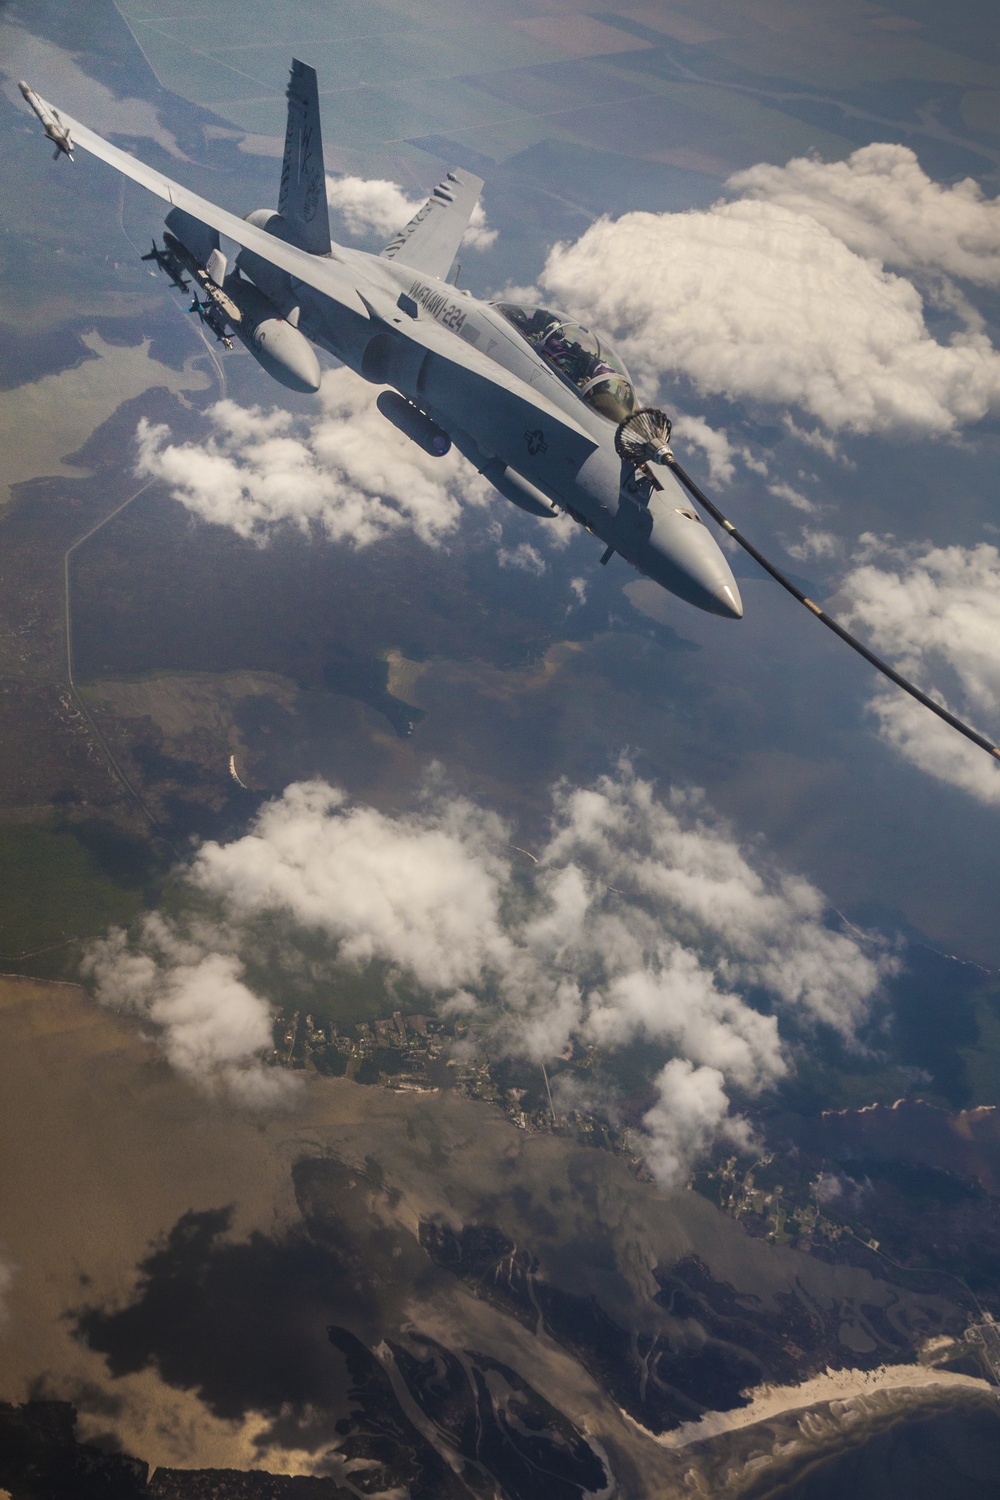 VMGR-252 Conducts an Aerial Refuel for VMFA-224 and VMA-136